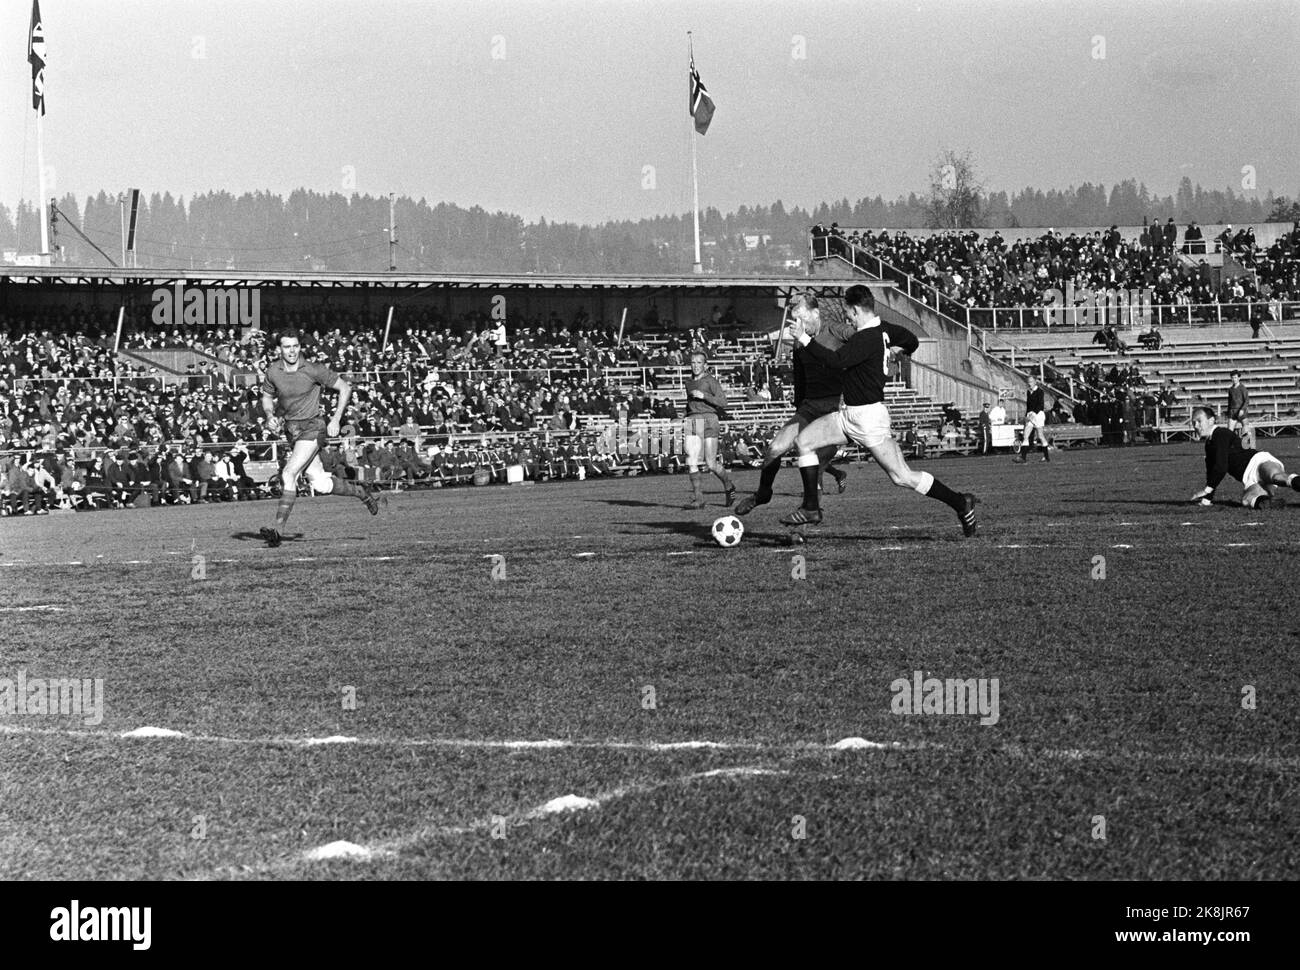 Oslo, 19651107. Skeid -frigg 2-1. Skeid- Frigg. Cup final in football. This is from the third match. There were only 7,000 spectators on the third match in the final this year. Photo: Henrik Laurvik Stock Photo